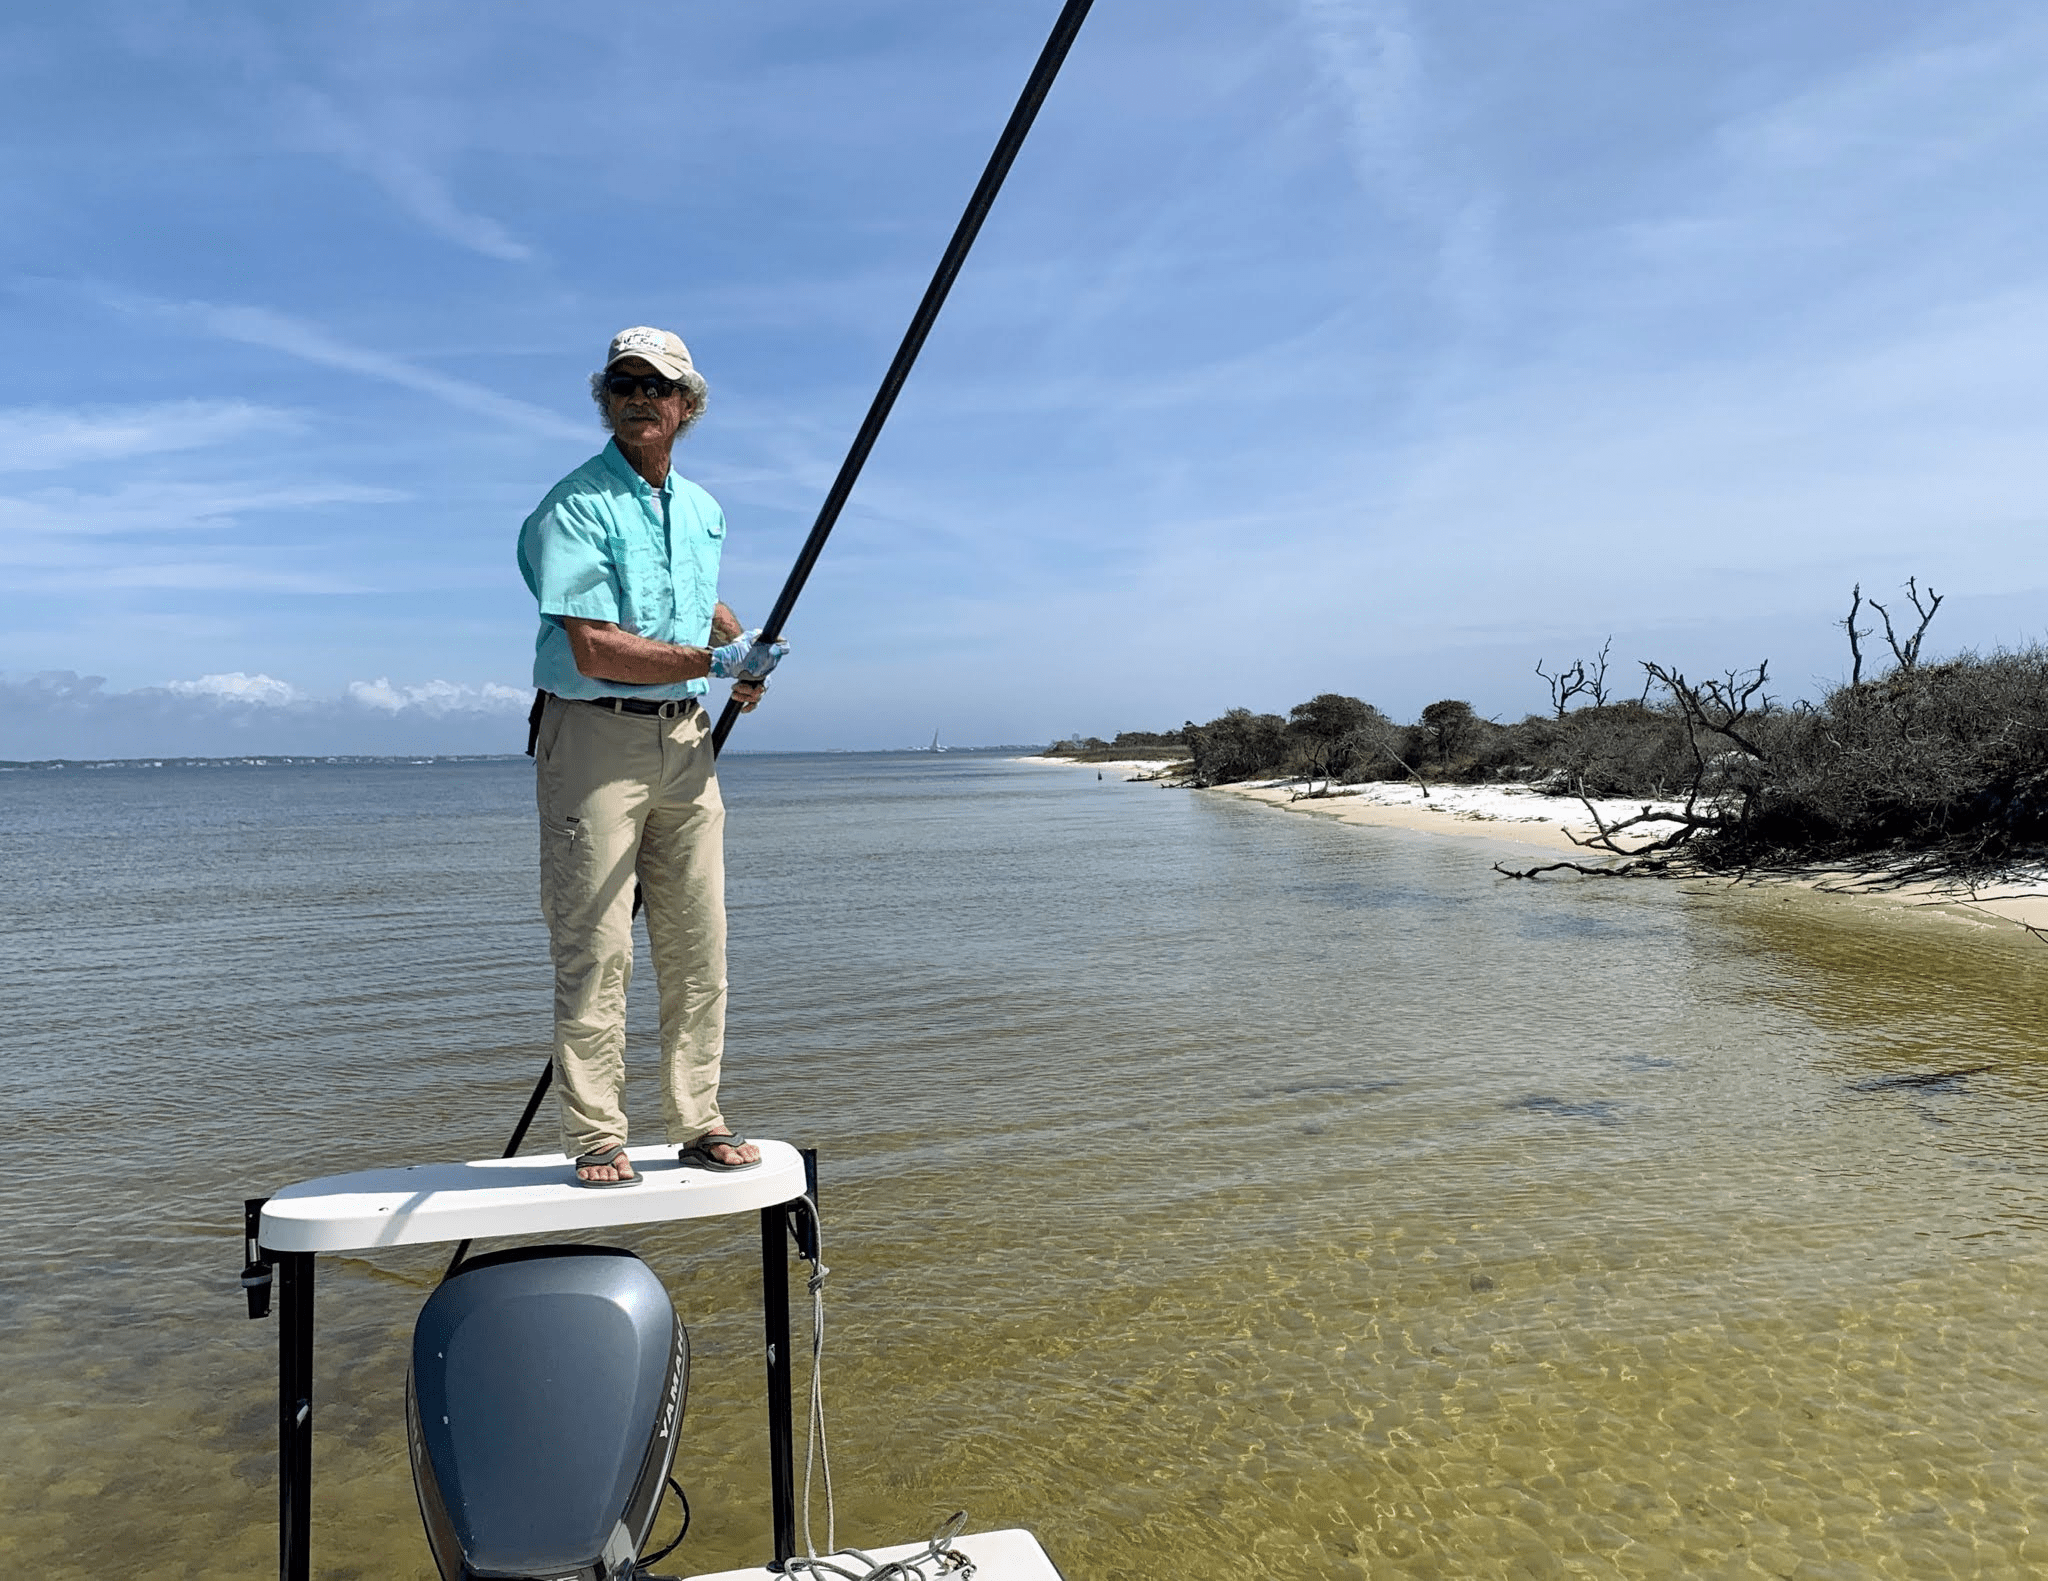 Captain poles skiff through clear shallow water in Santa Rosa Sound.